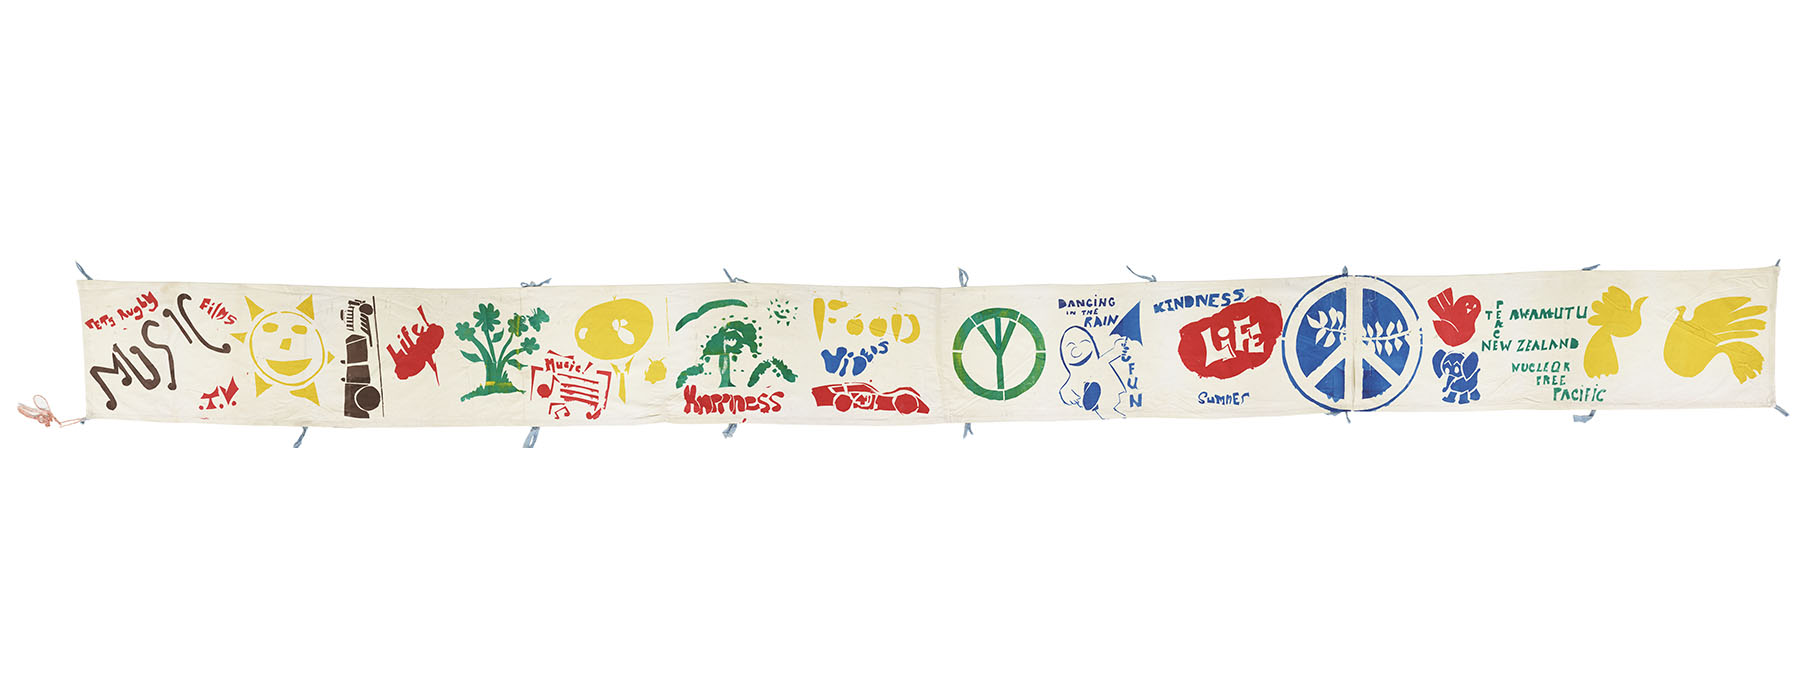 Banner featuring lots of painted on symbols and words: trees, peace signs, doves, the sun, and the words “music”, “life”, “kindness”, “happiness”, etc.